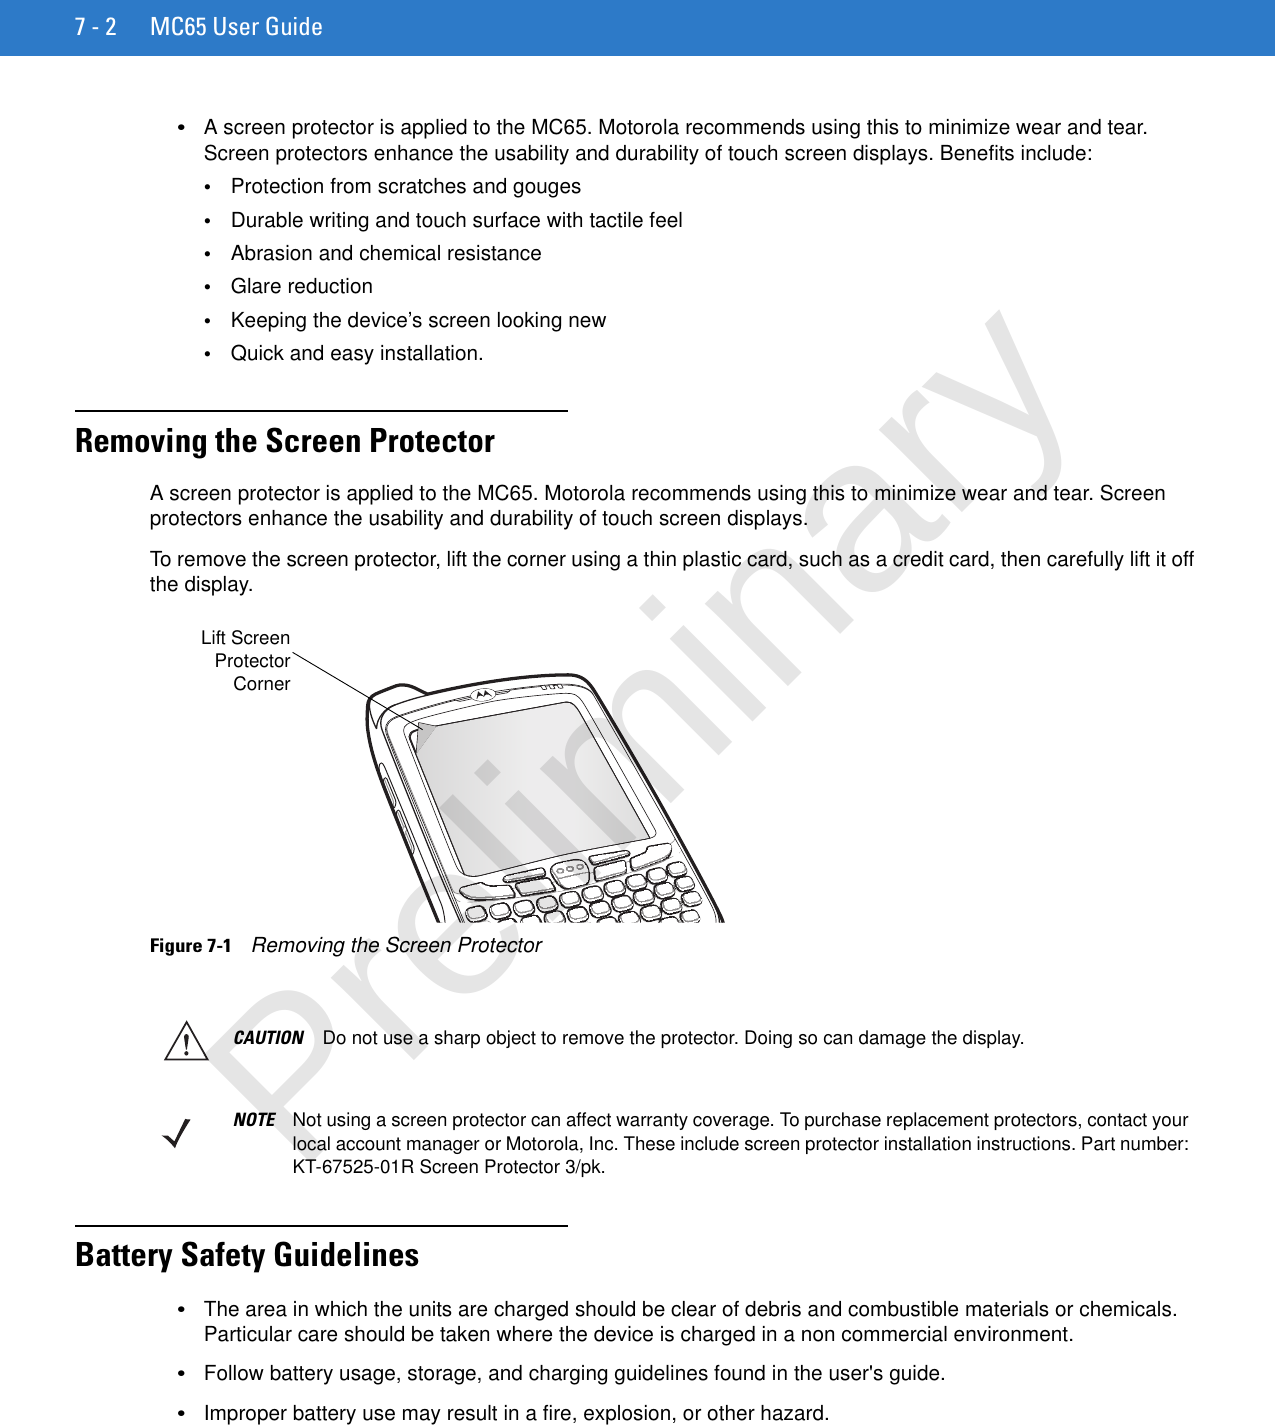 7 - 2 MC65 User Guide•A screen protector is applied to the MC65. Motorola recommends using this to minimize wear and tear. Screen protectors enhance the usability and durability of touch screen displays. Benefits include:•Protection from scratches and gouges•Durable writing and touch surface with tactile feel•Abrasion and chemical resistance•Glare reduction•Keeping the device’s screen looking new•Quick and easy installation.Removing the Screen ProtectorA screen protector is applied to the MC65. Motorola recommends using this to minimize wear and tear. Screen protectors enhance the usability and durability of touch screen displays.To remove the screen protector, lift the corner using a thin plastic card, such as a credit card, then carefully lift it off the display.Figure 7-1    Removing the Screen ProtectorBattery Safety Guidelines•The area in which the units are charged should be clear of debris and combustible materials or chemicals. Particular care should be taken where the device is charged in a non commercial environment.•Follow battery usage, storage, and charging guidelines found in the user&apos;s guide.•Improper battery use may result in a fire, explosion, or other hazard.Lift ScreenProtectorCornerCAUTION Do not use a sharp object to remove the protector. Doing so can damage the display.NOTE Not using a screen protector can affect warranty coverage. To purchase replacement protectors, contact your local account manager or Motorola, Inc. These include screen protector installation instructions. Part number: KT-67525-01R Screen Protector 3/pk.Preliminary